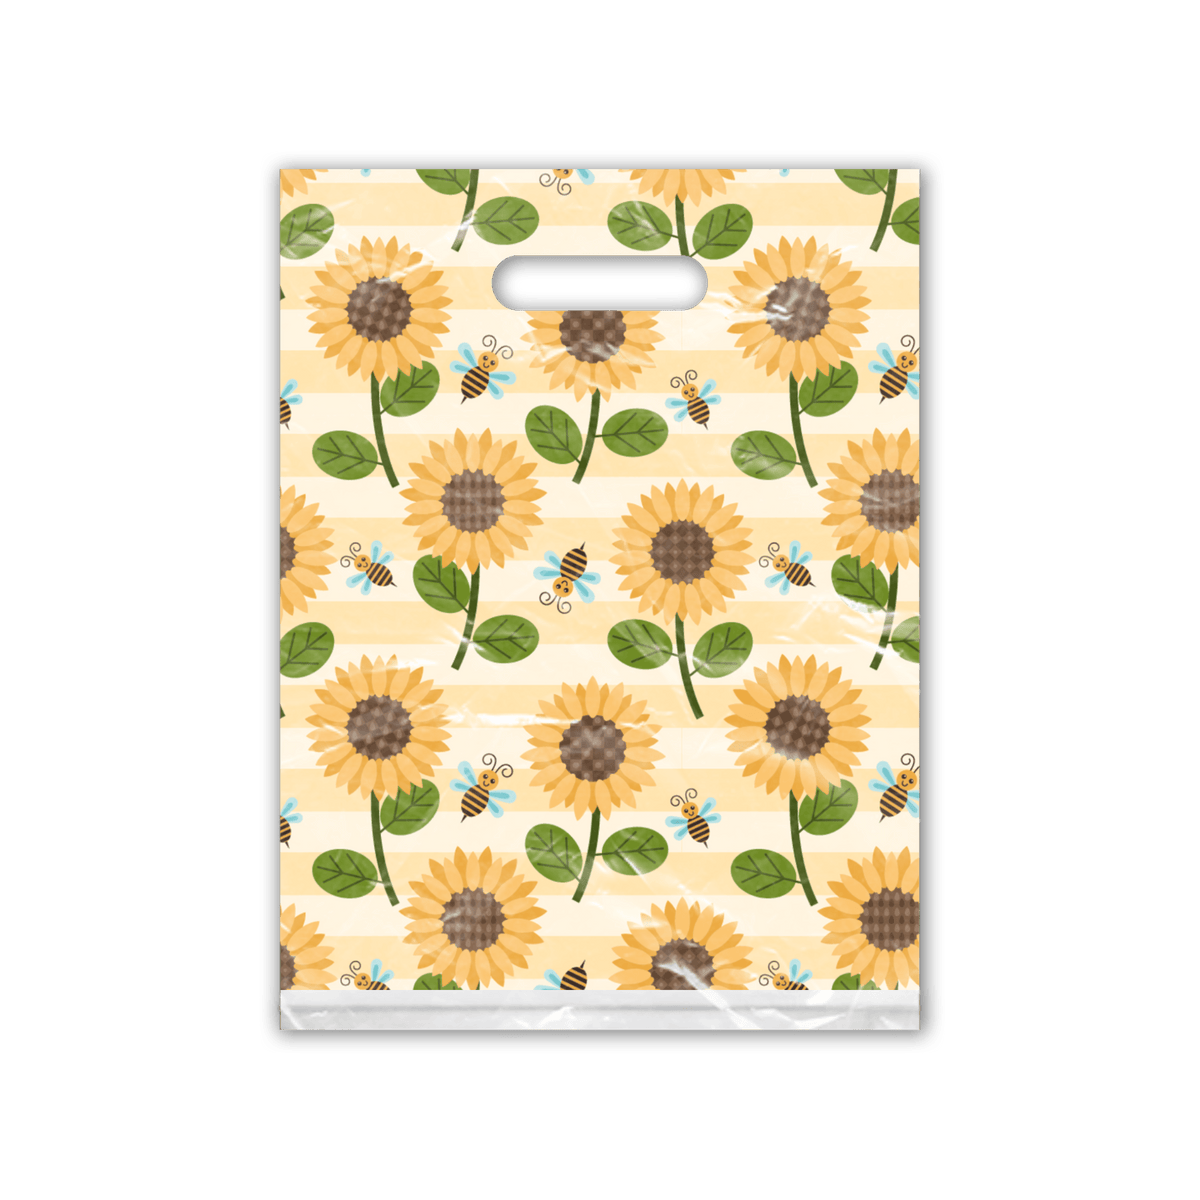 Sunflower and bees Designer Merchandise bags Pro supply Global